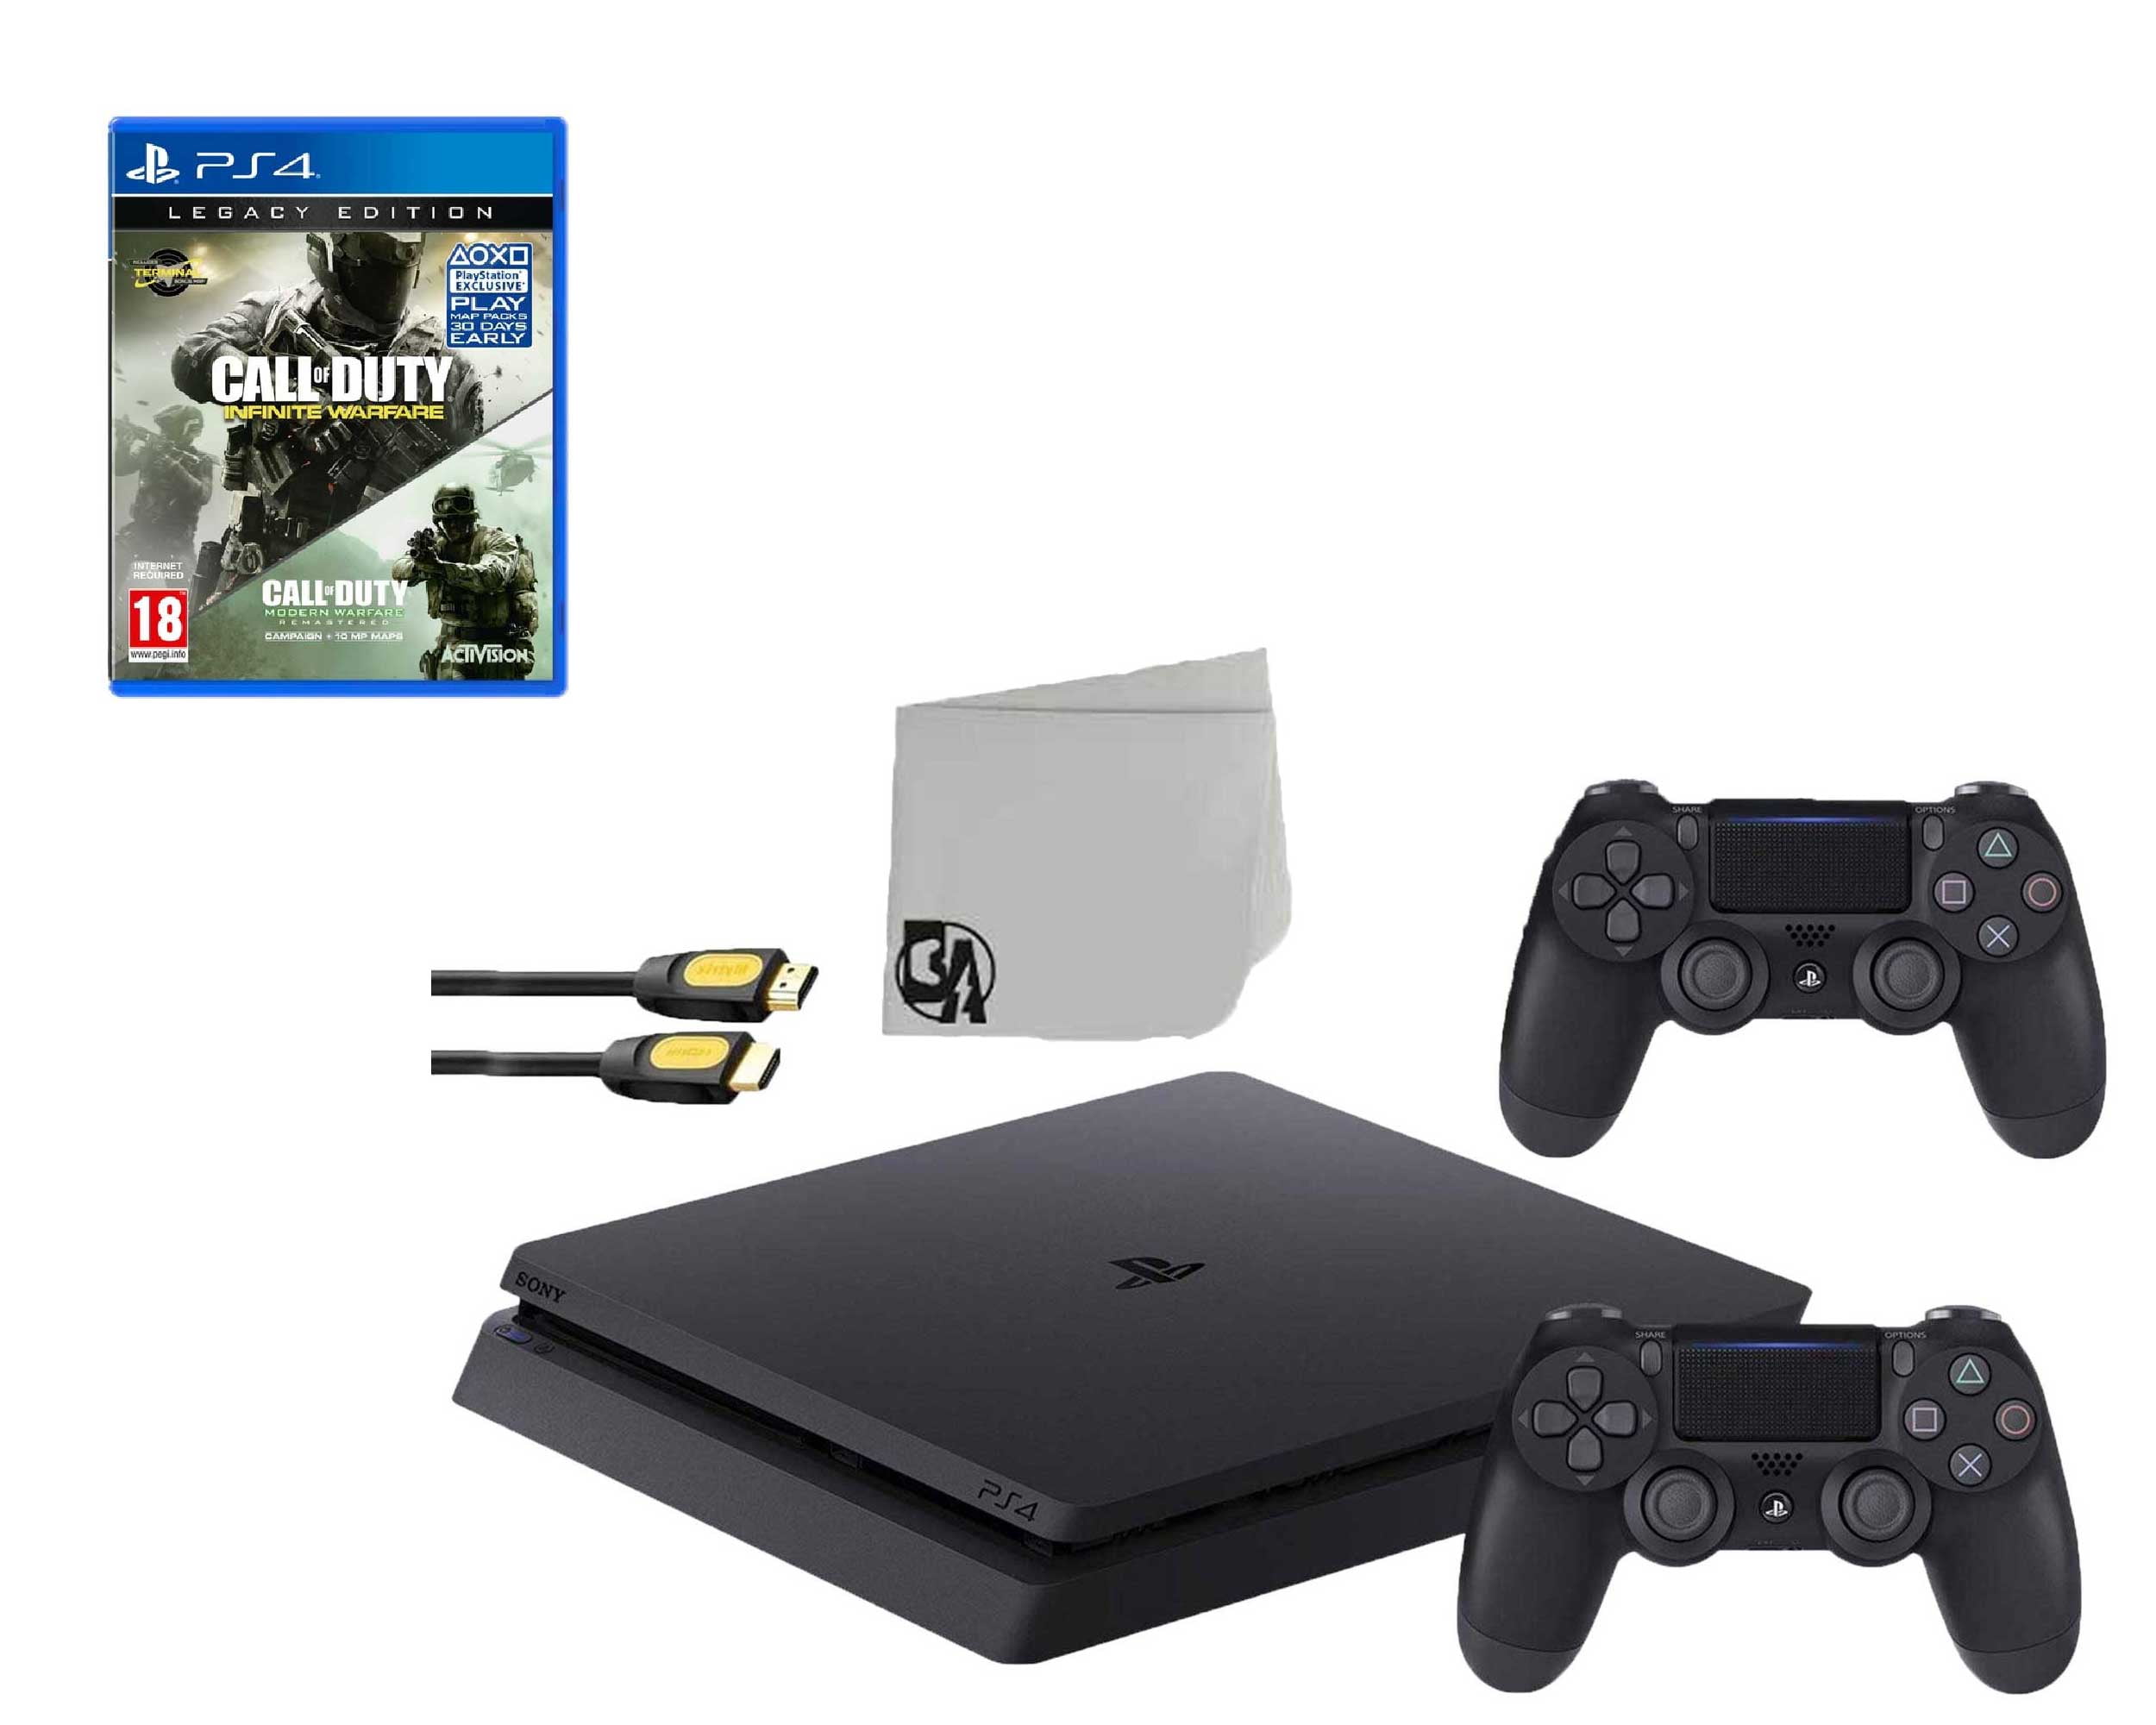 Sony 2215A PlayStation 4 500GB Gaming Console Black 2 Controller Included with FIFA-19 Game BOLT AXTION Bundle Lke New - Walmart.com